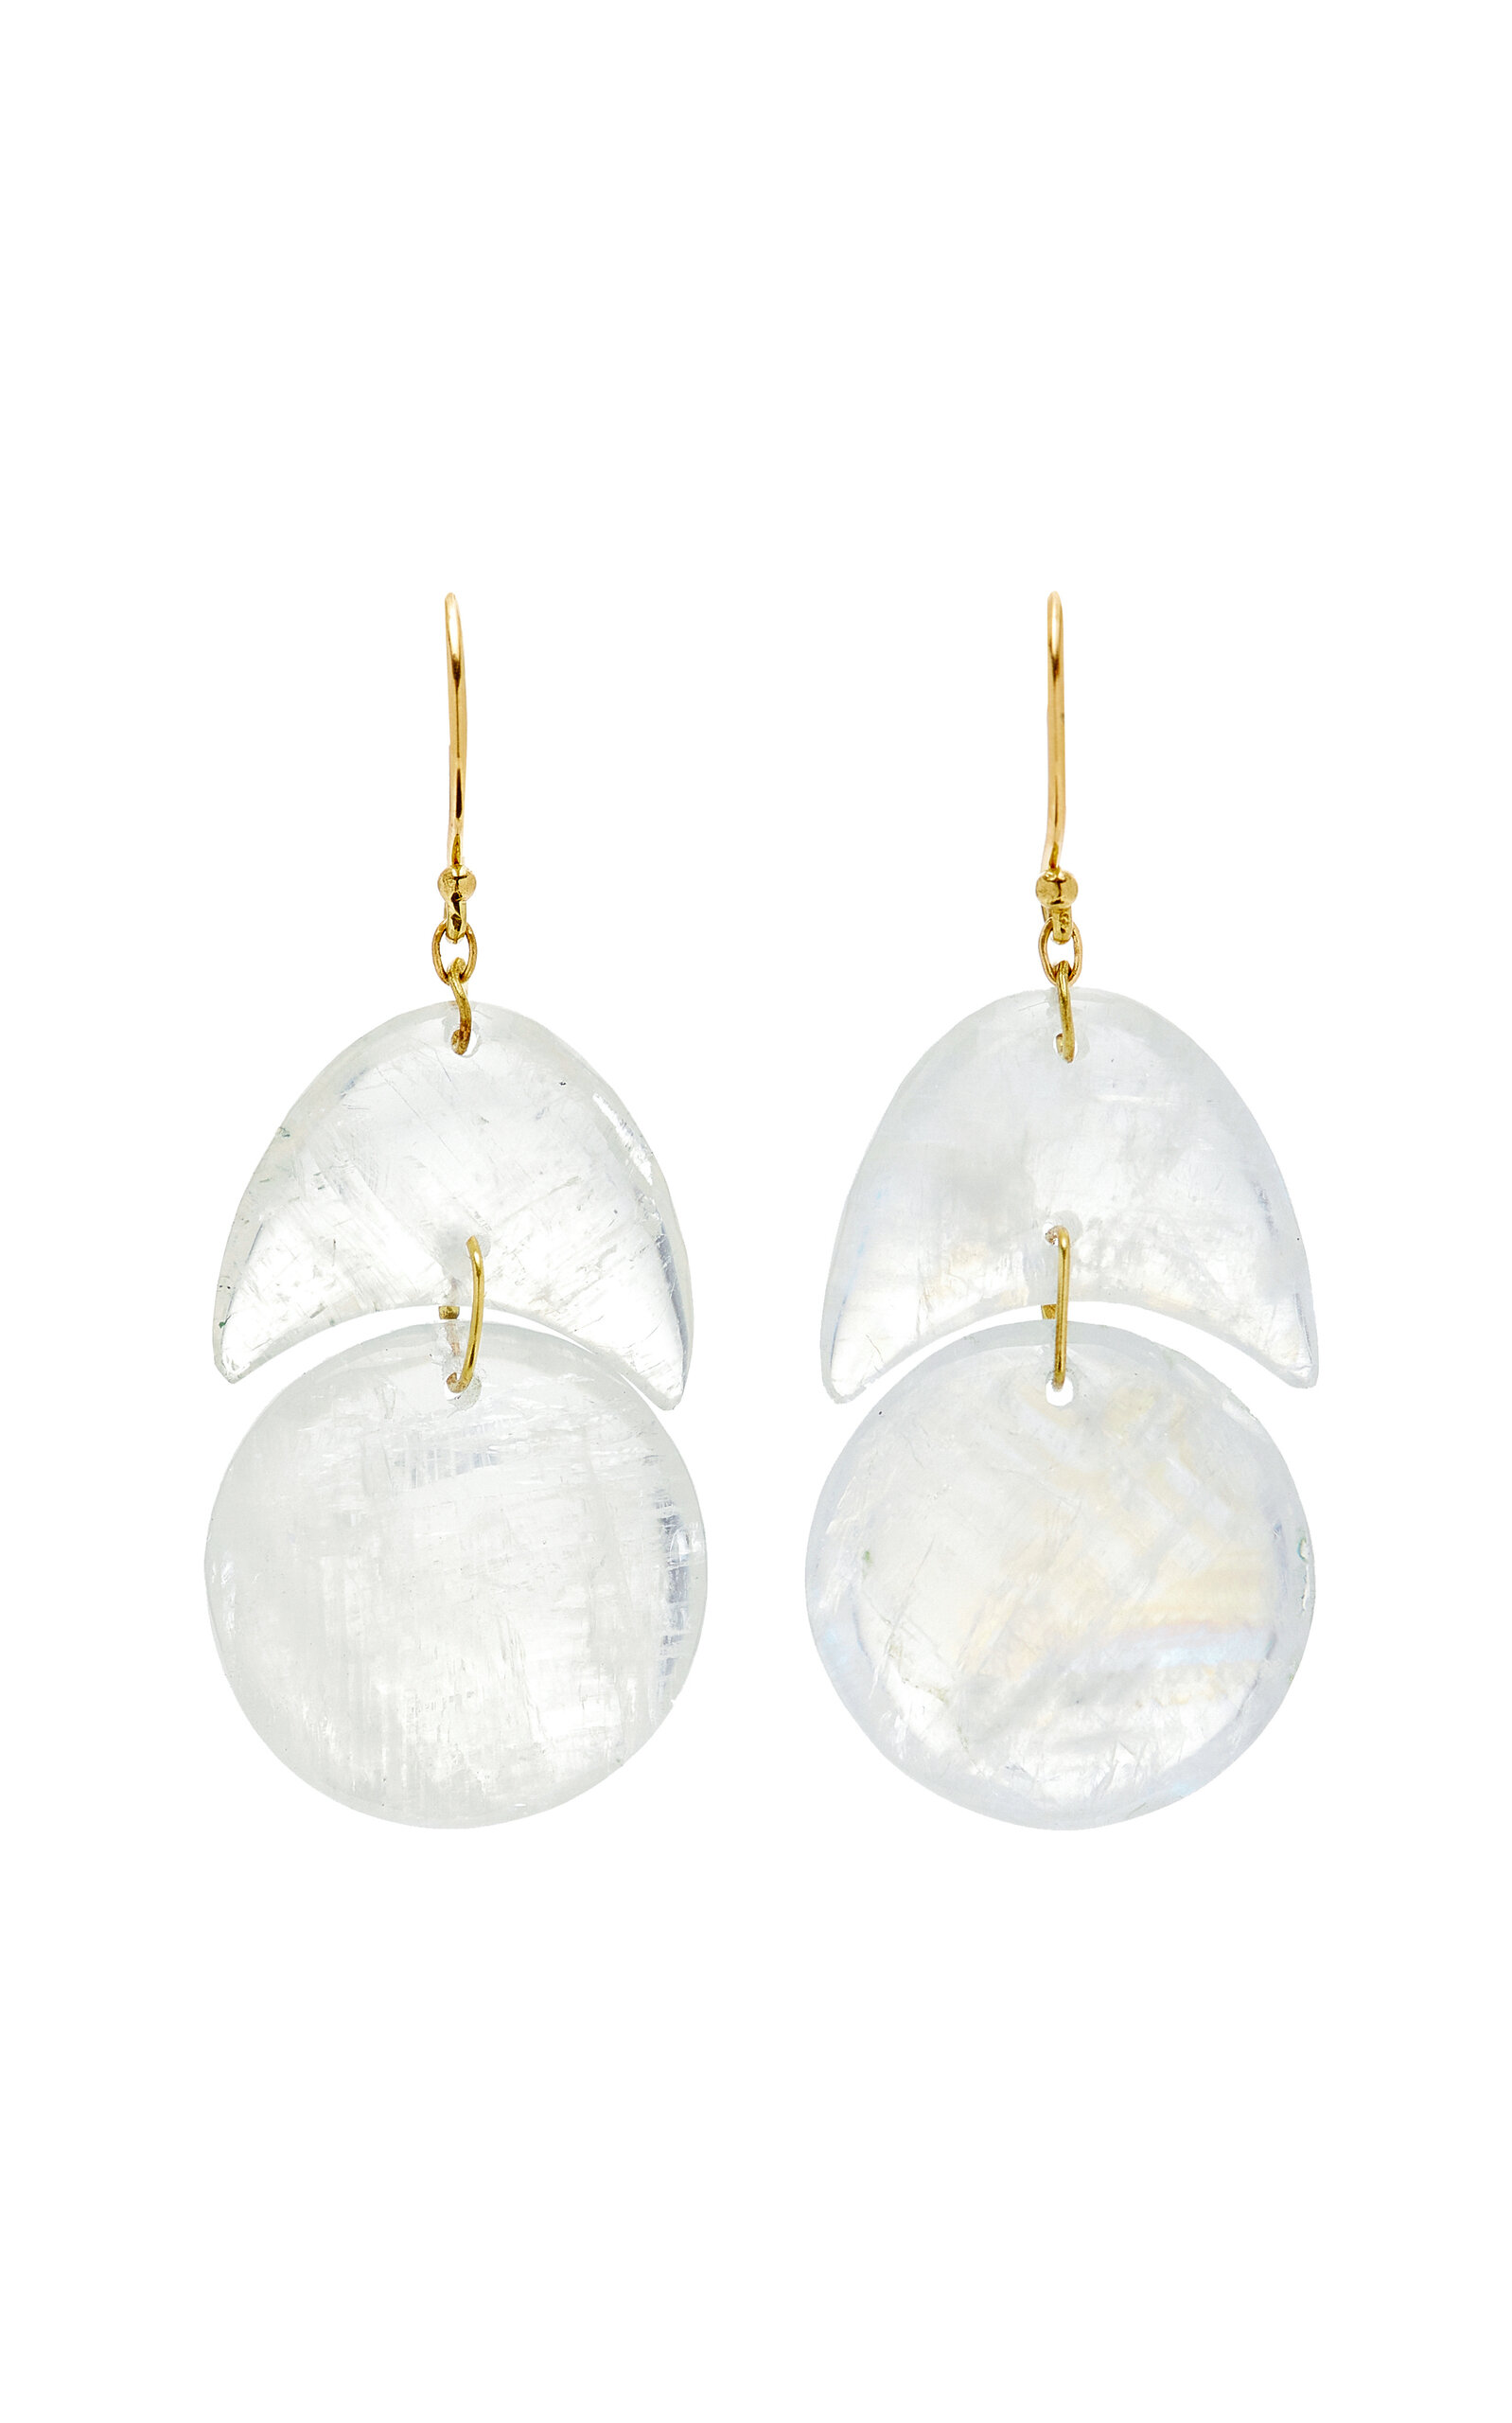 Ten Thousand Things Tiny Arps 18k Yellow Gold Moonstone Earrings In White